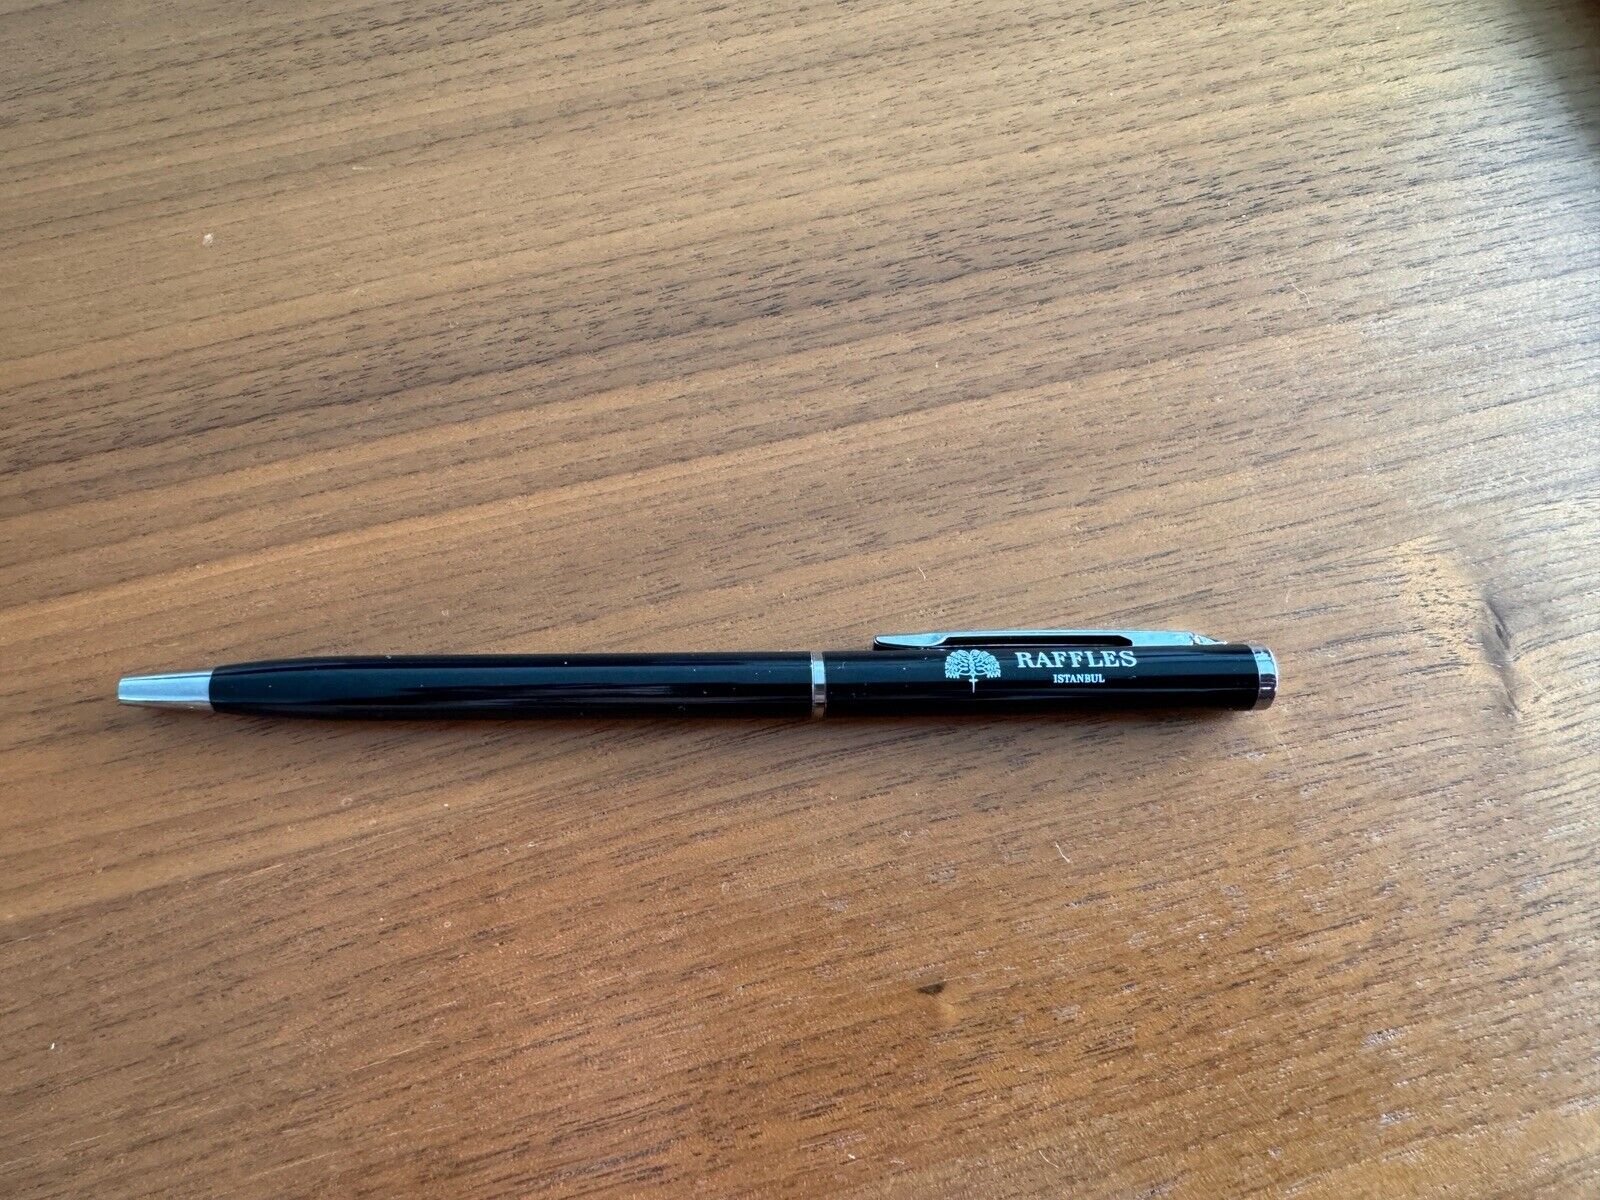 Raffles Hotel Istanbul Ball Pen Black Slightly Used. Great Condition